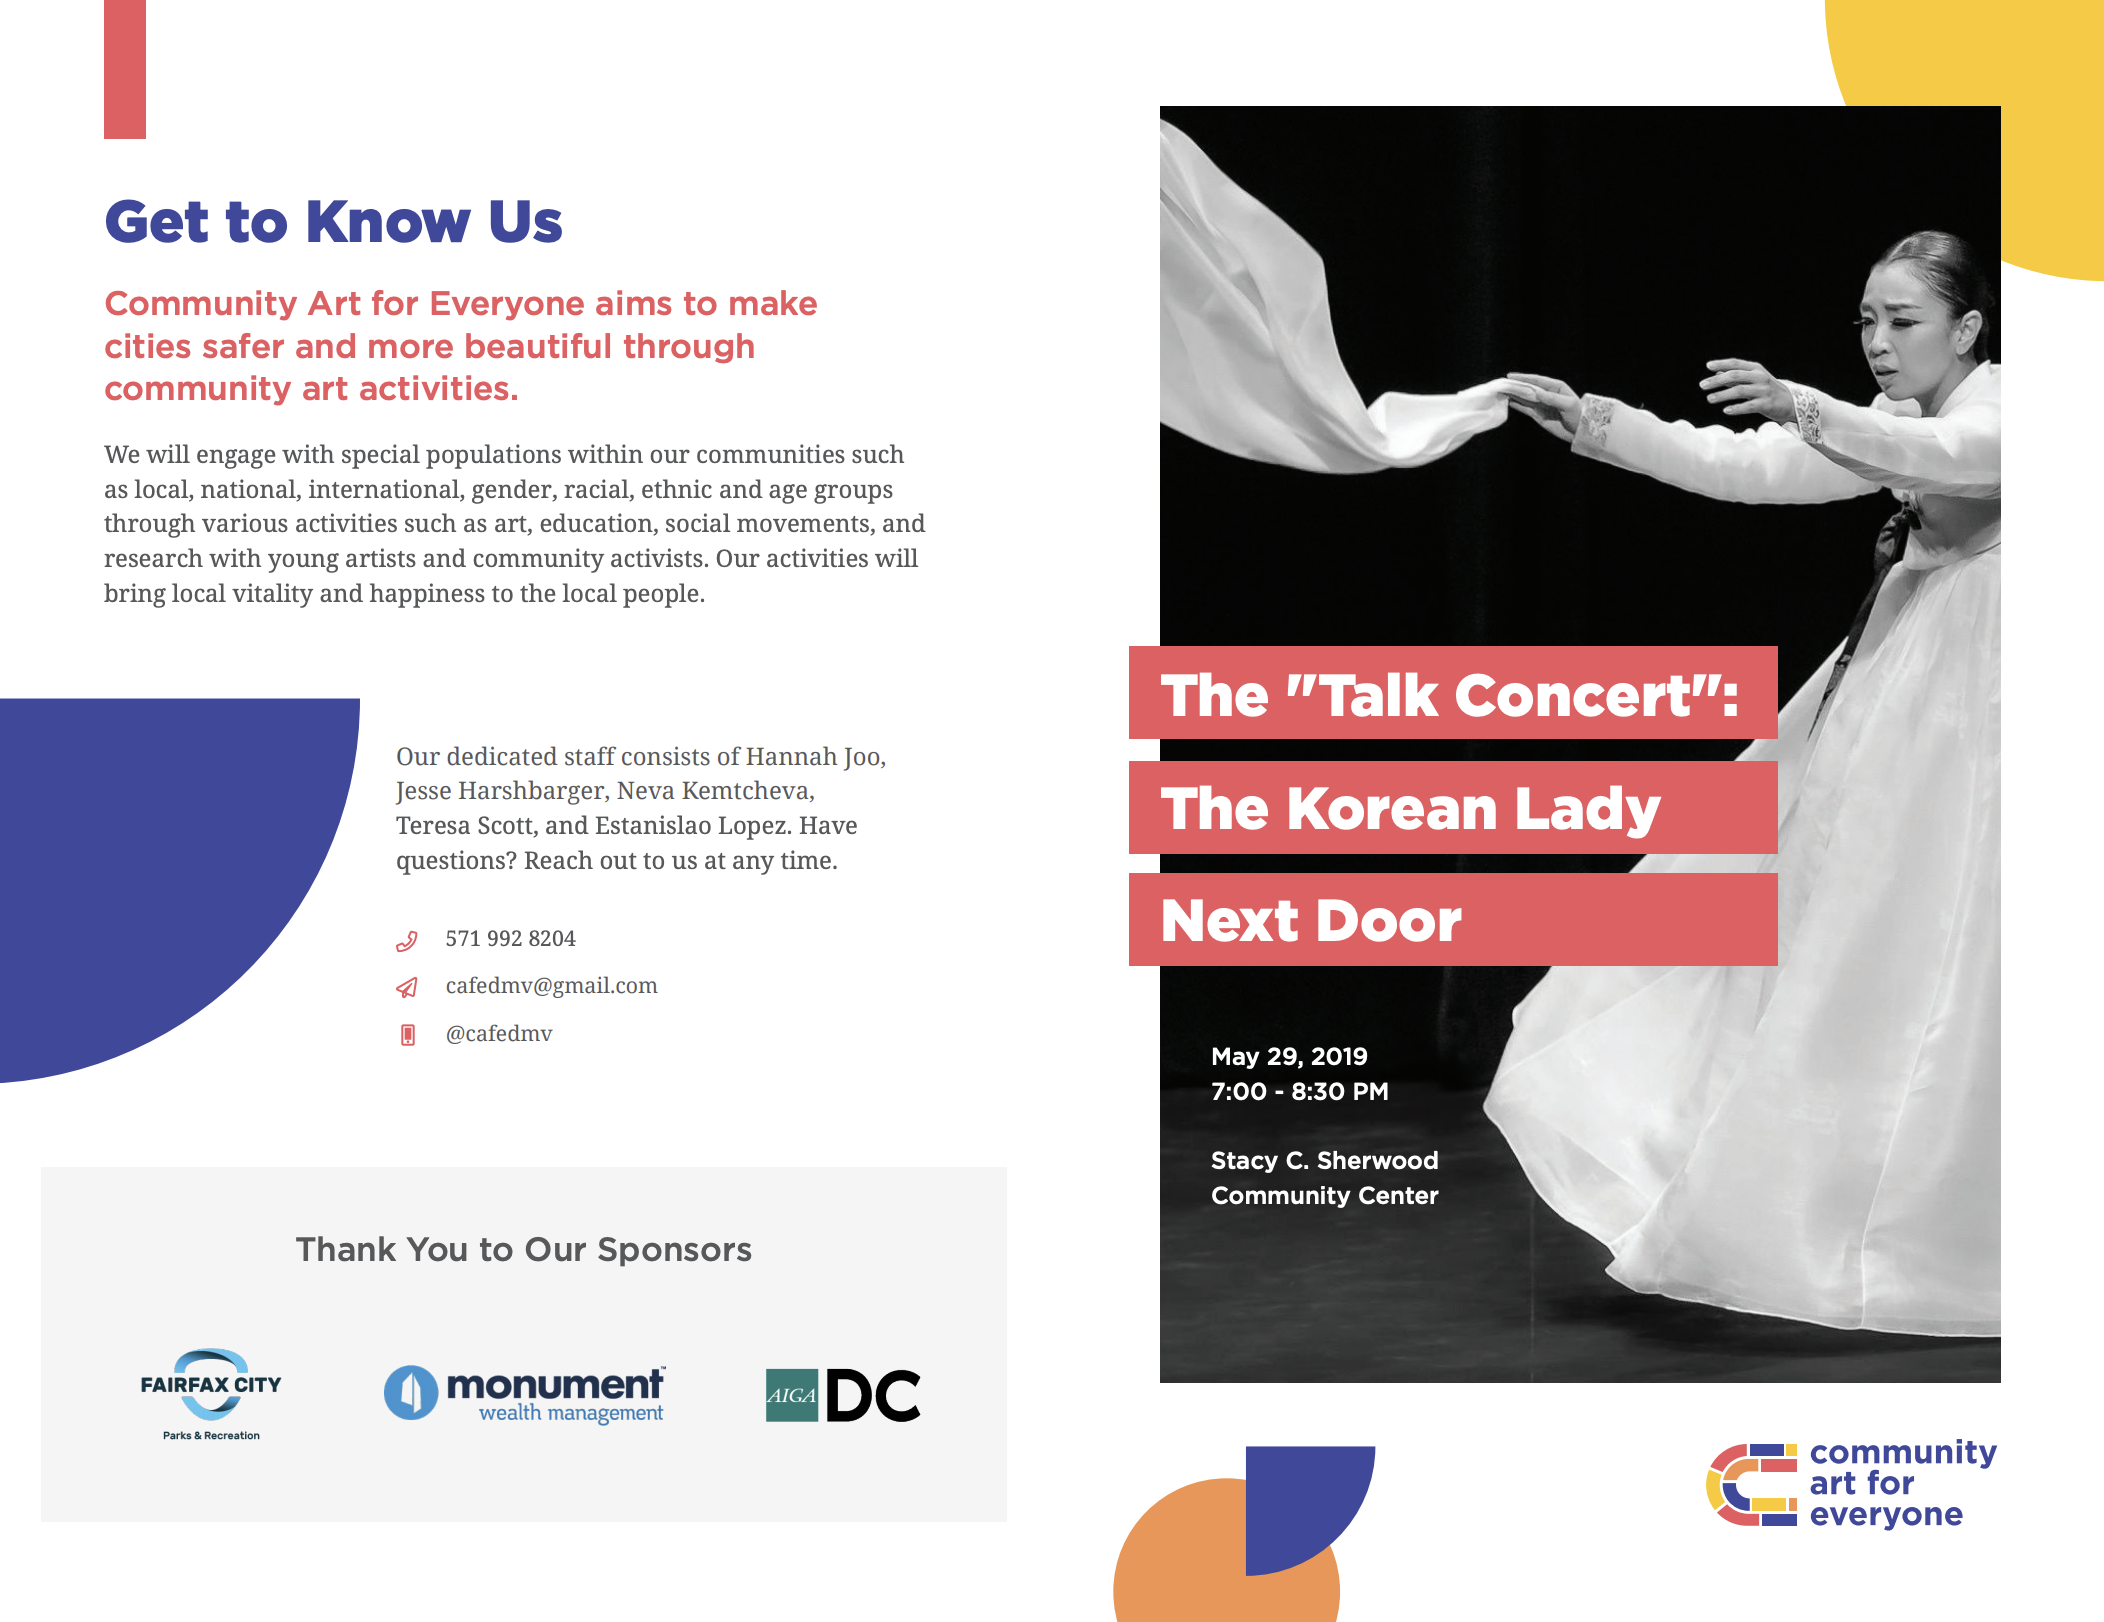 A colorful flyer juxtaposed against a Korean woman dancing in black and white.